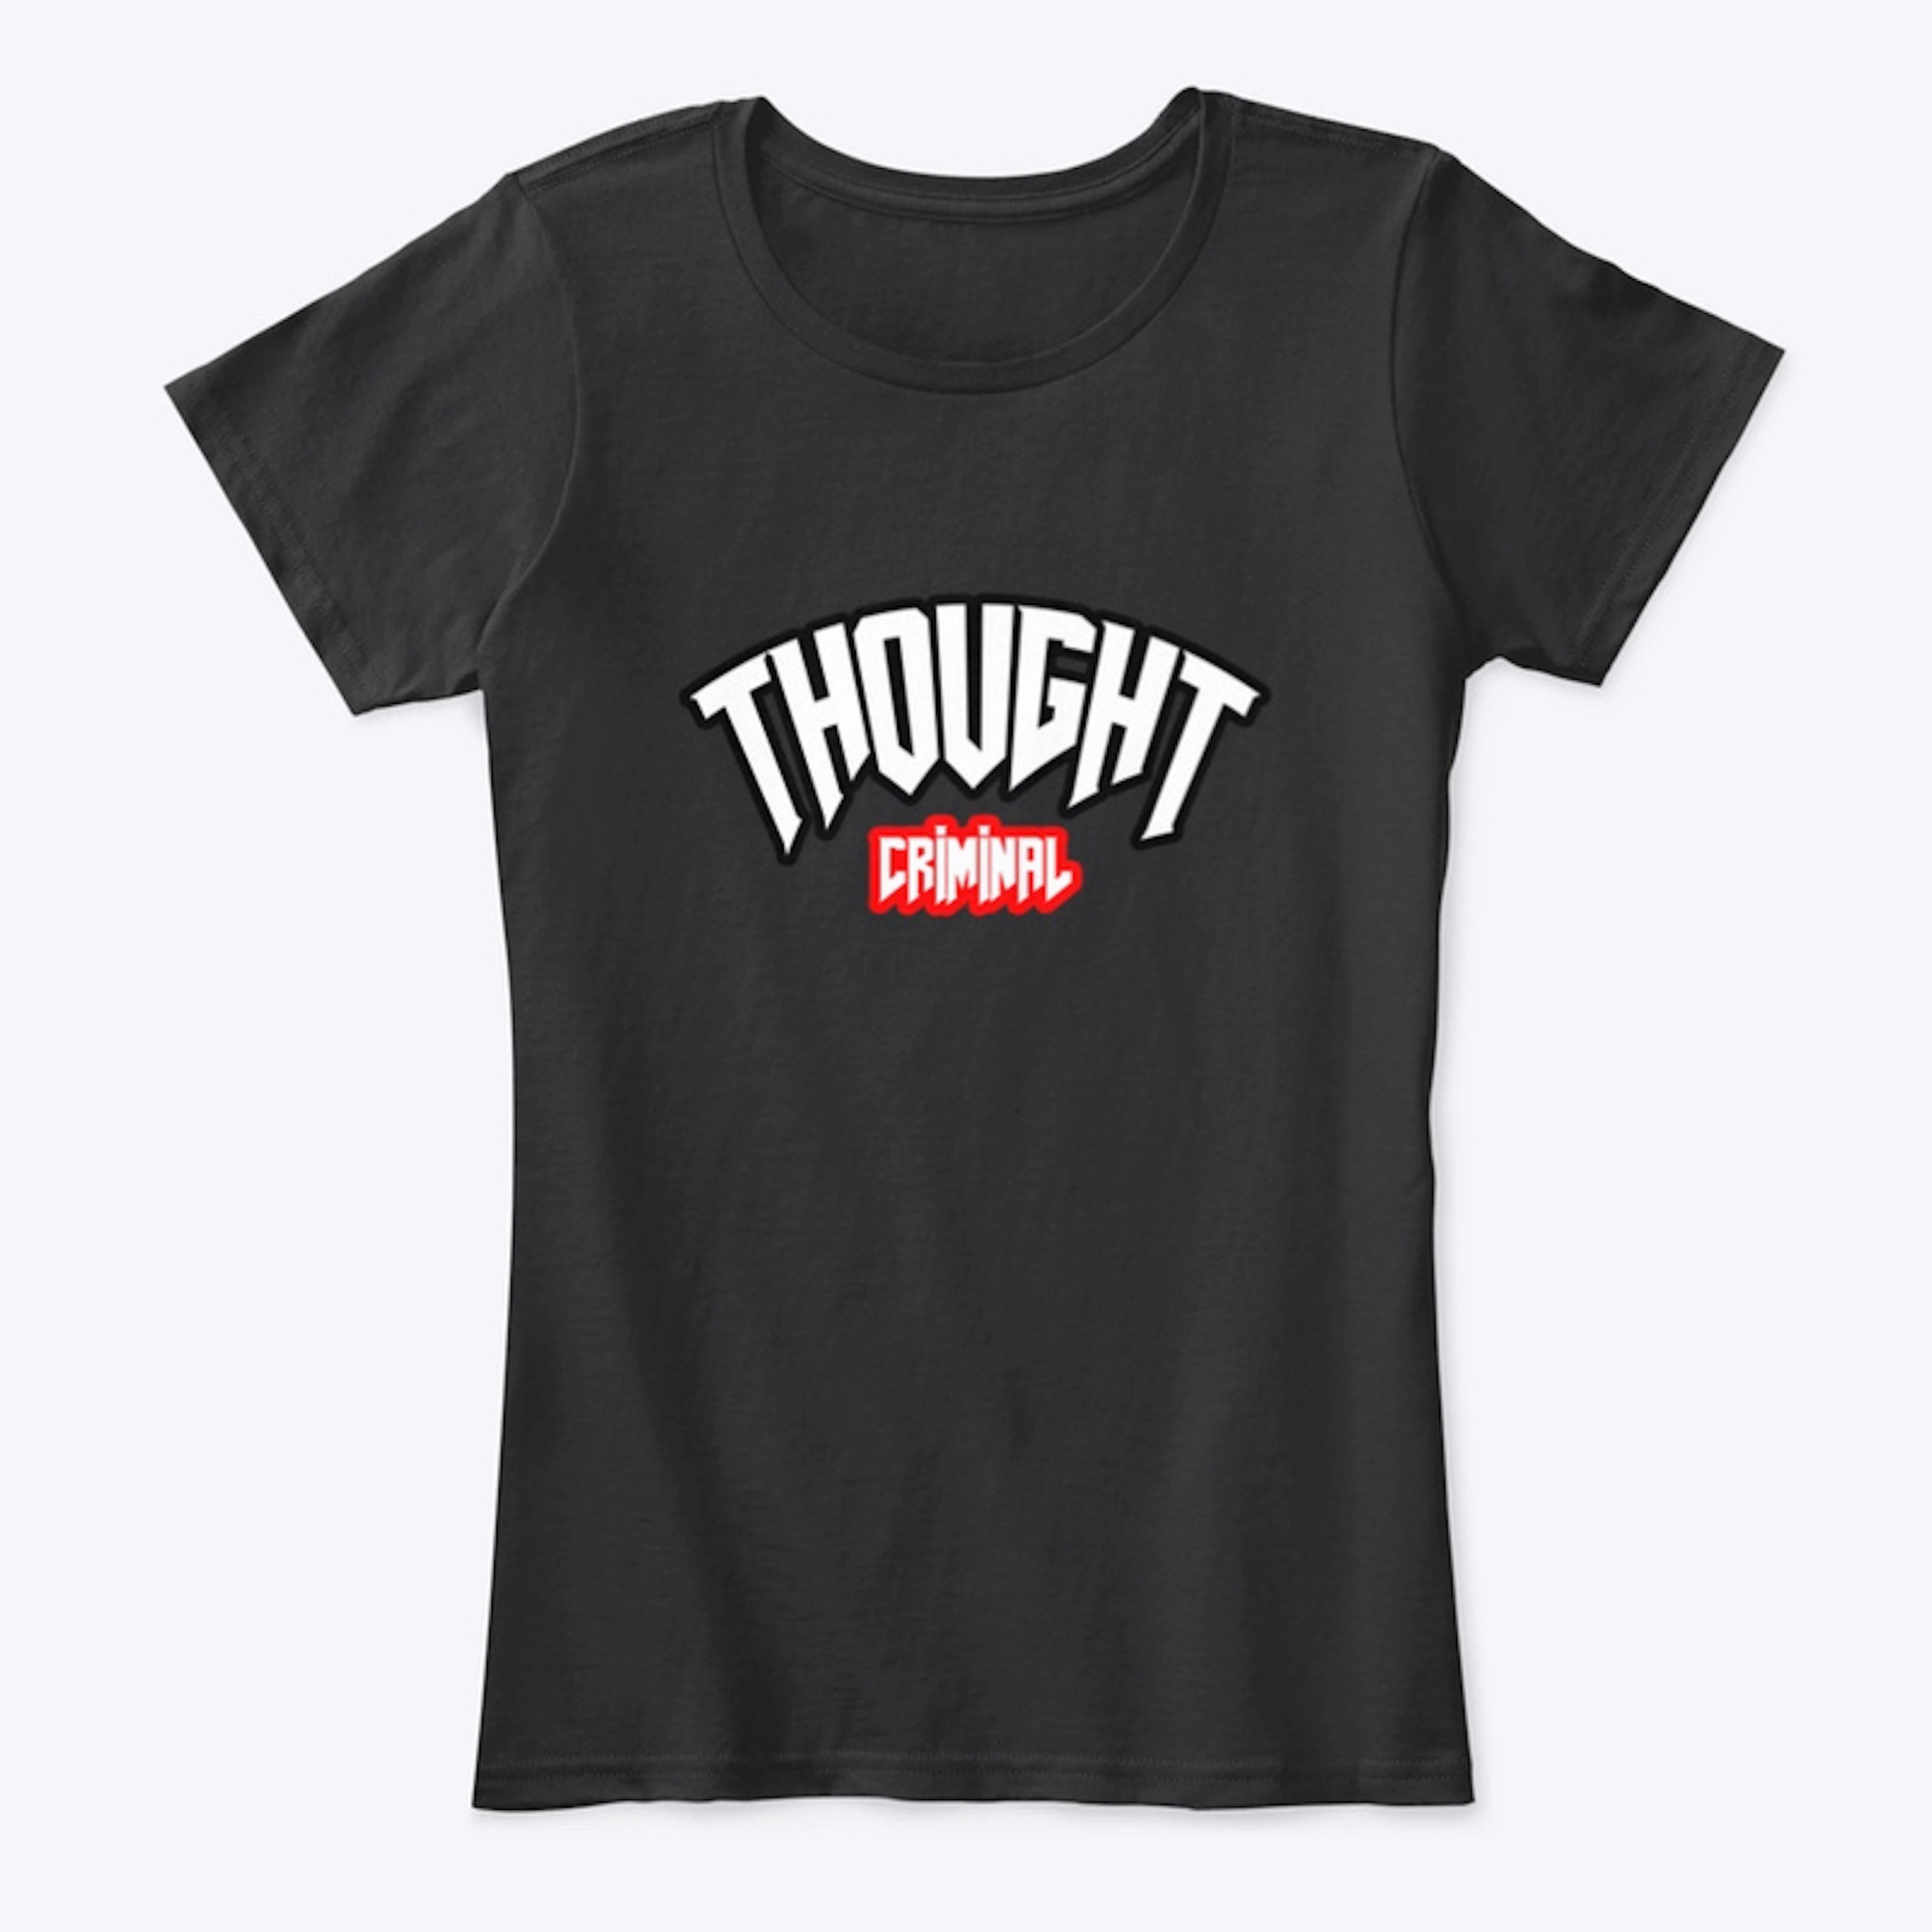 THOUGHT CRIMINAL MERCH LINE